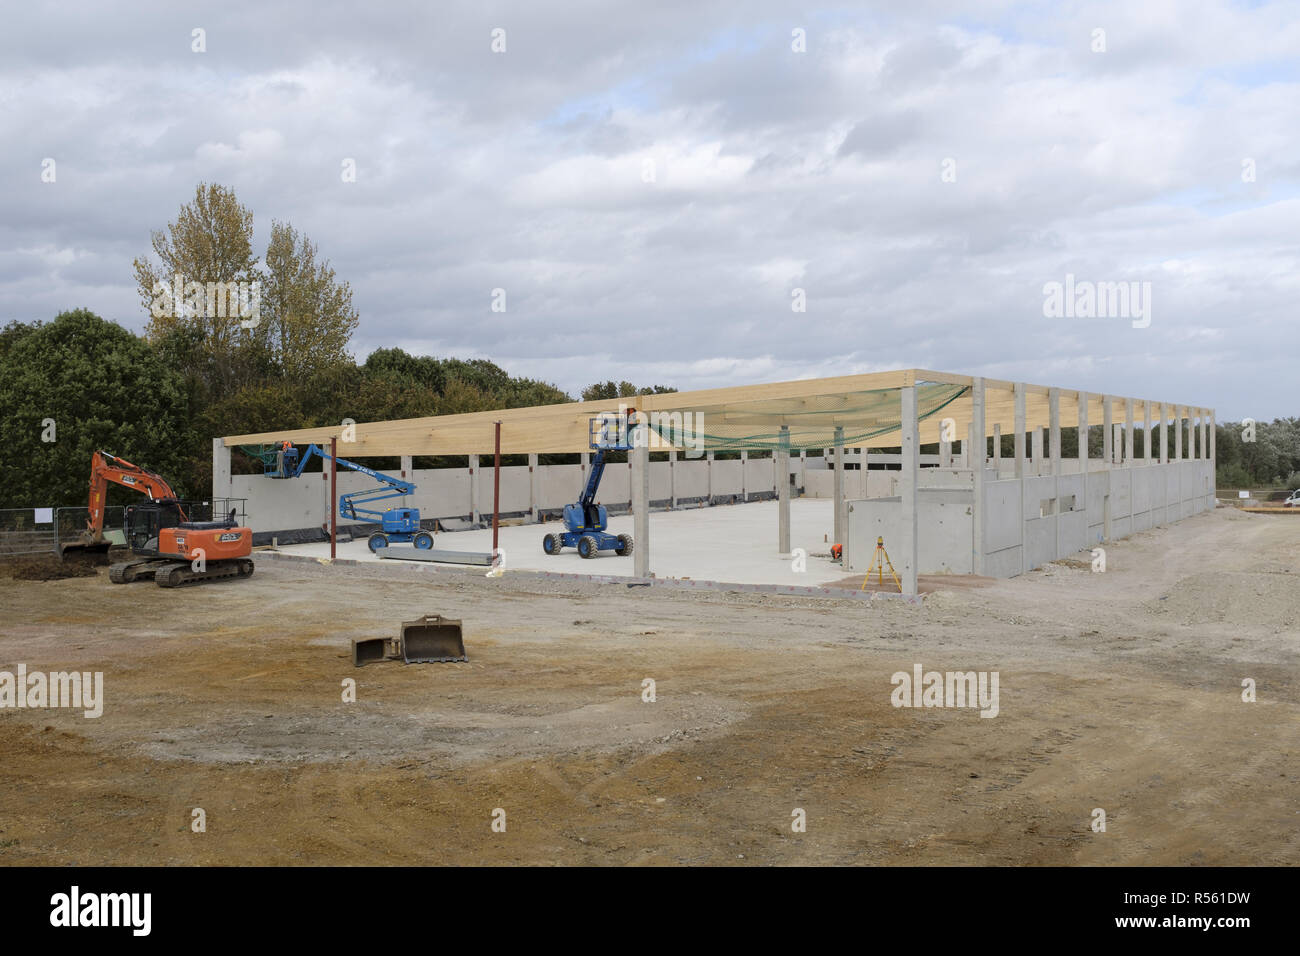 Buckingham, UK - August 19, 2018. Building site of a new Lidl supermarket under construction in Buckingham, UK. The company aims to have 1000 stores a Stock Photo